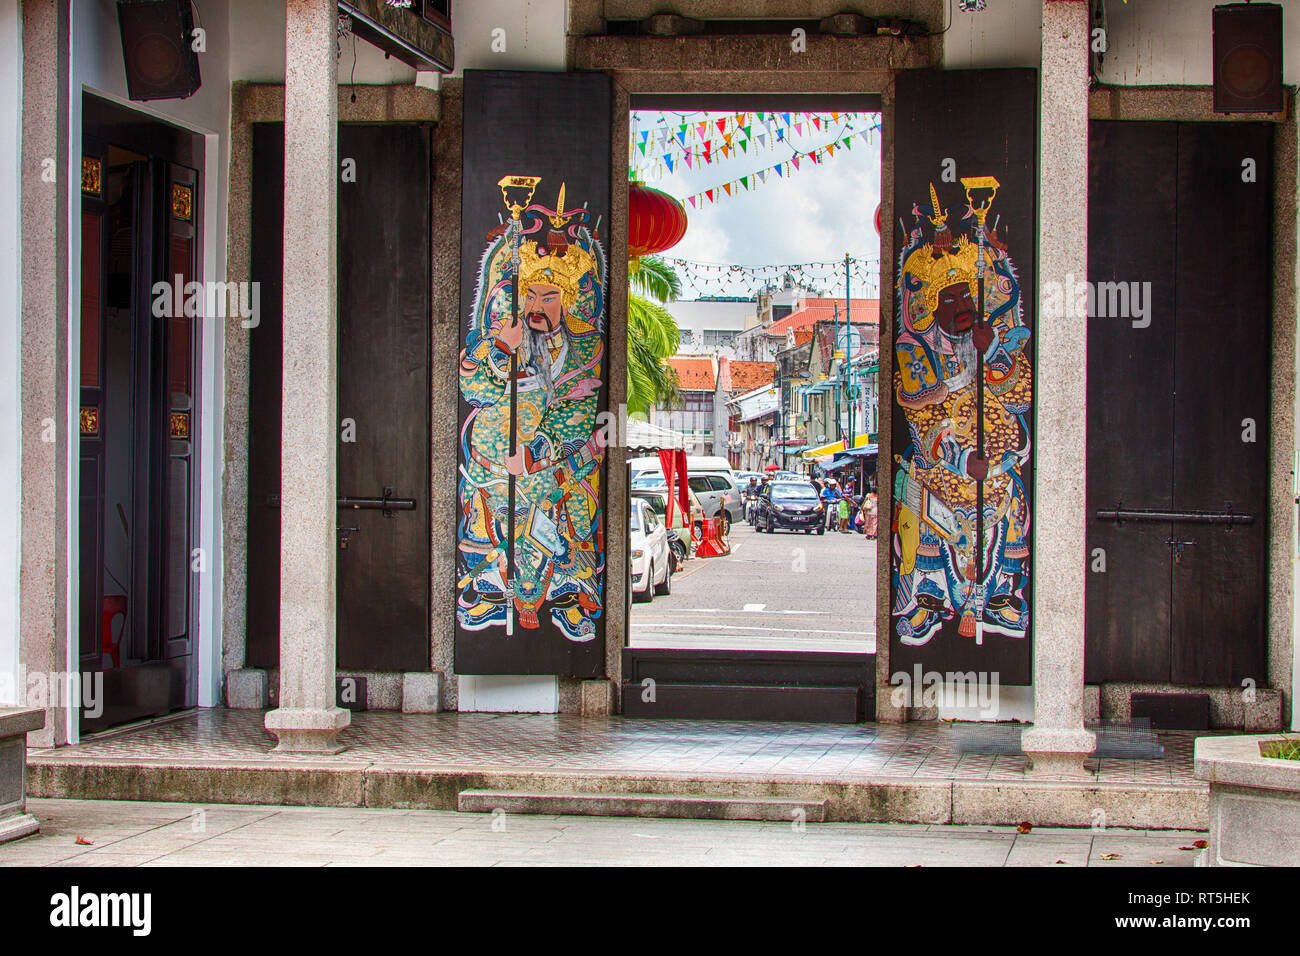 Street View from inside Han Jiang Ancestral Temple, George Town, Penang, Malaysia Stock Photo